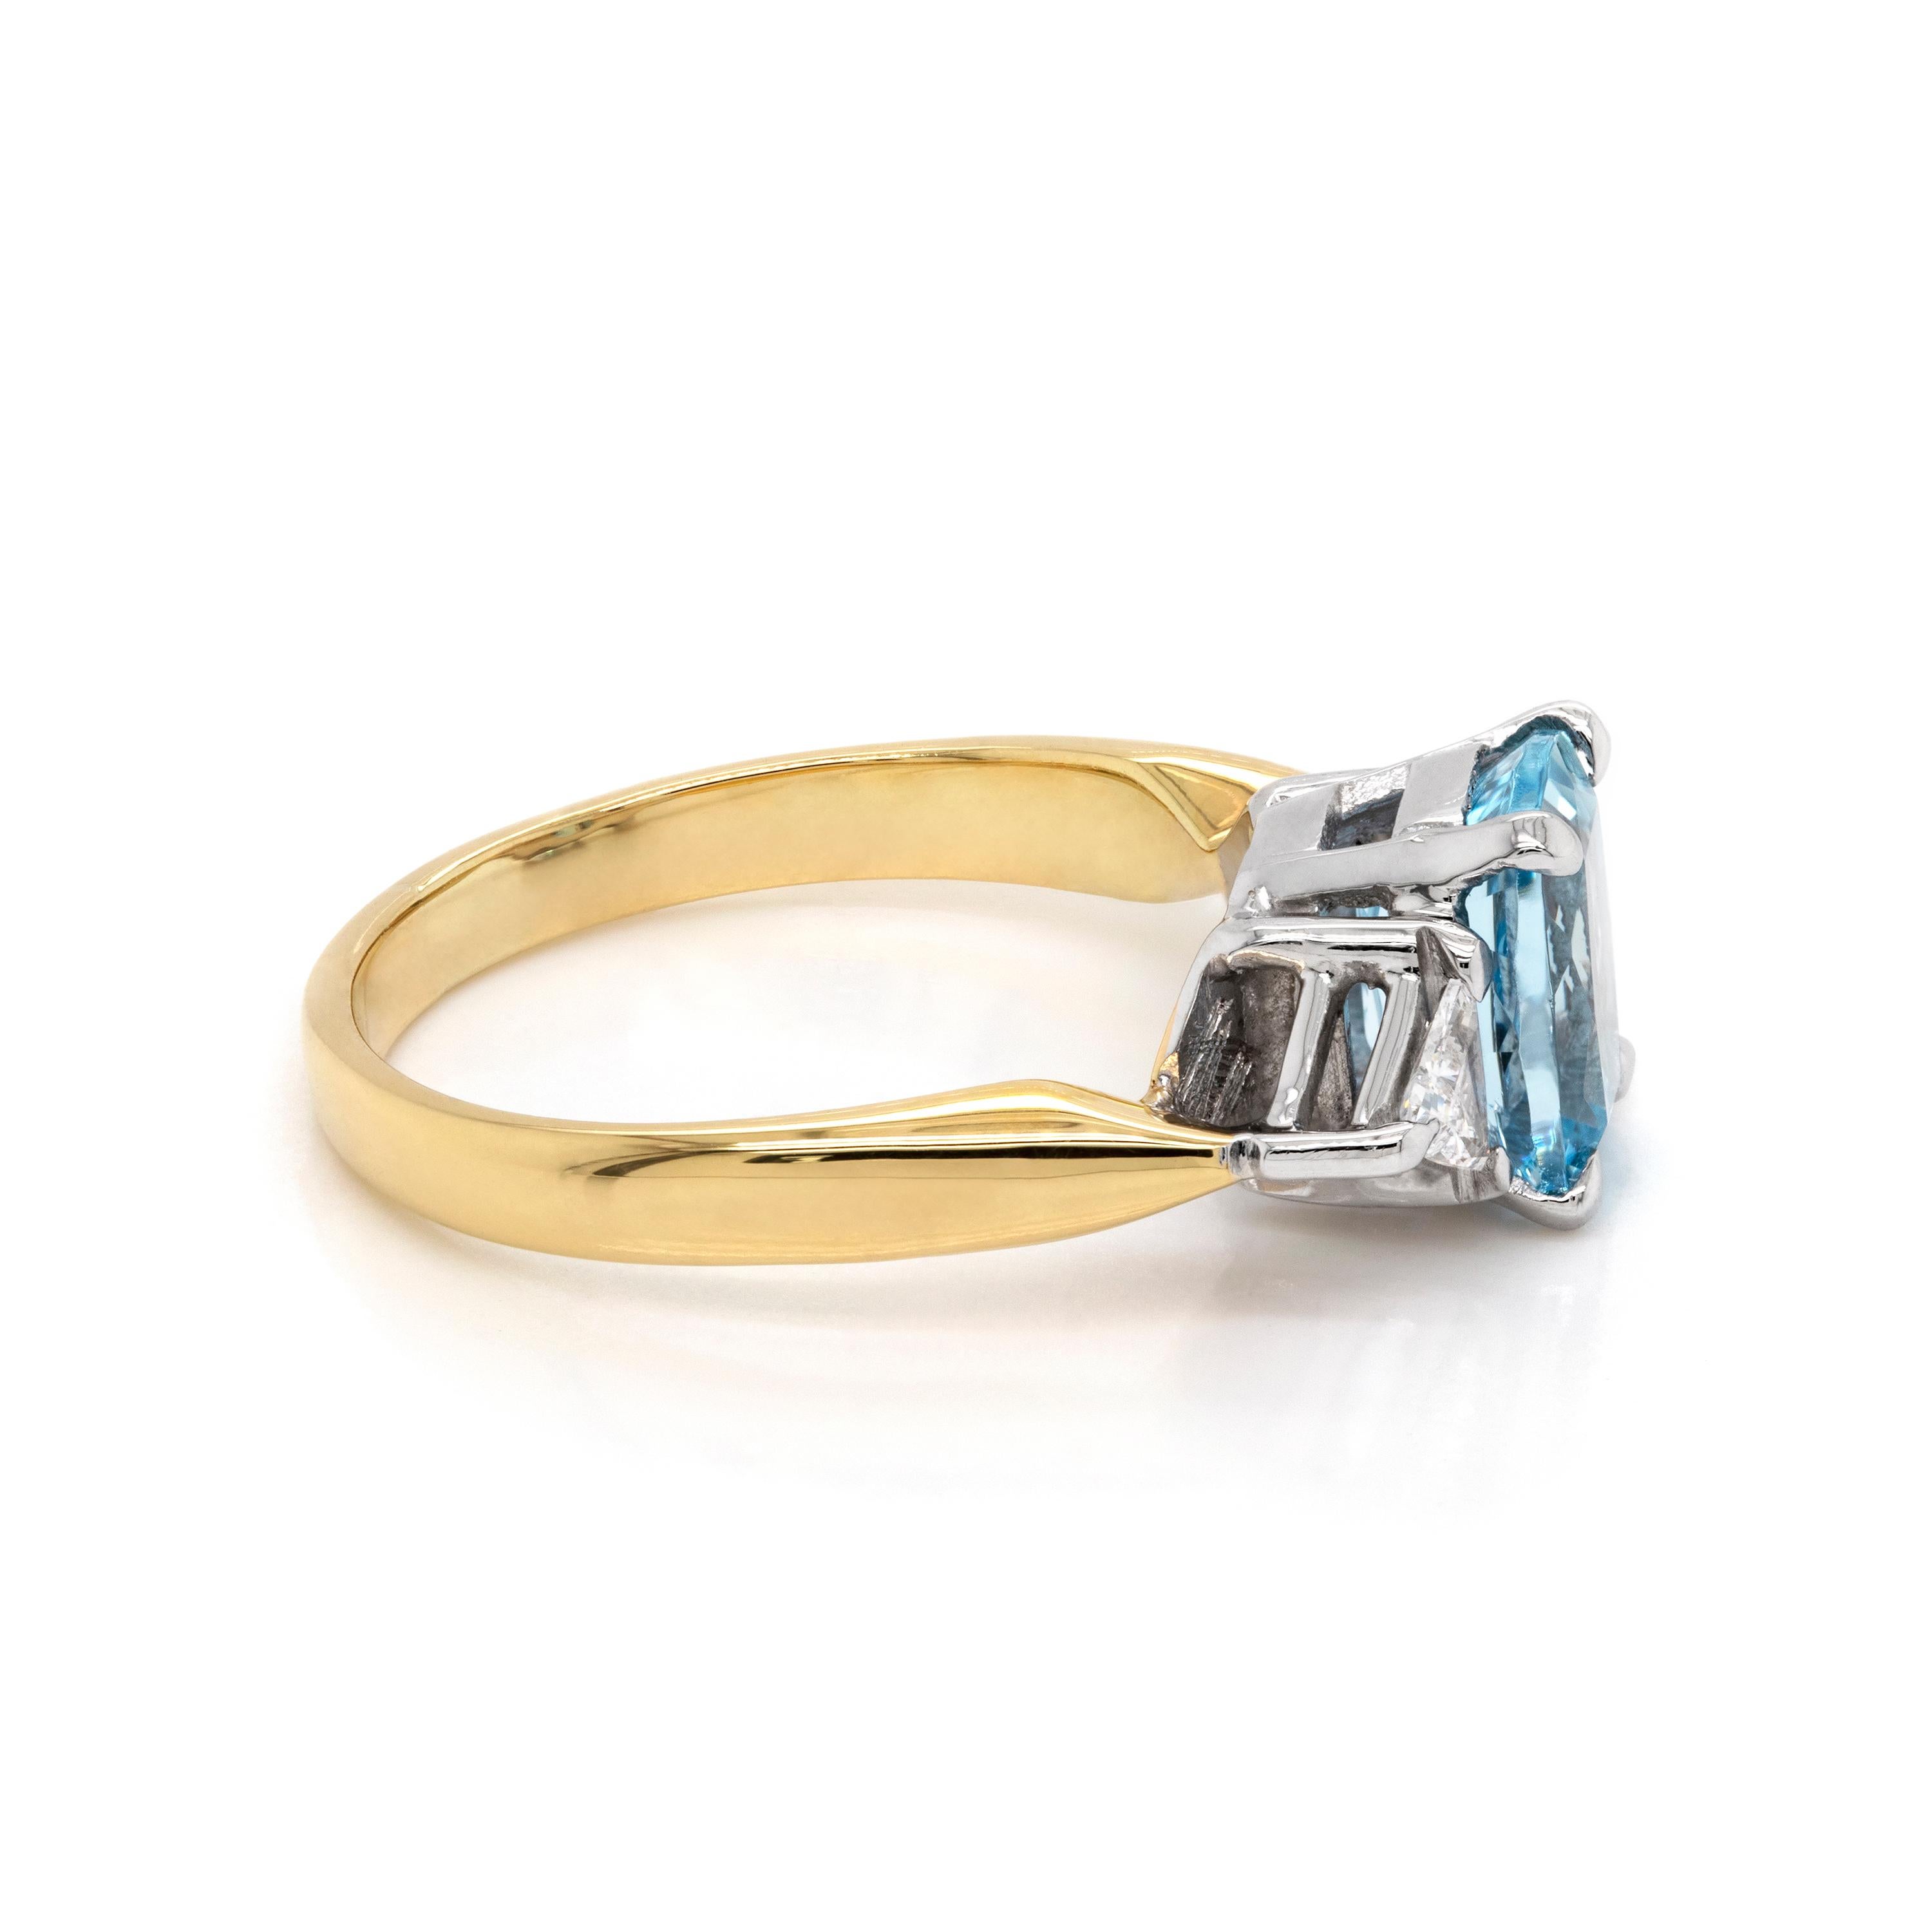 This beautiful ring features a 1.48 carat elongated cushion cut aquamarine mounted in a four claw, open back setting. The aquamarine is beautifully accompanied by a trillion cut diamond on either side mounted in a three claw, open back setting, all